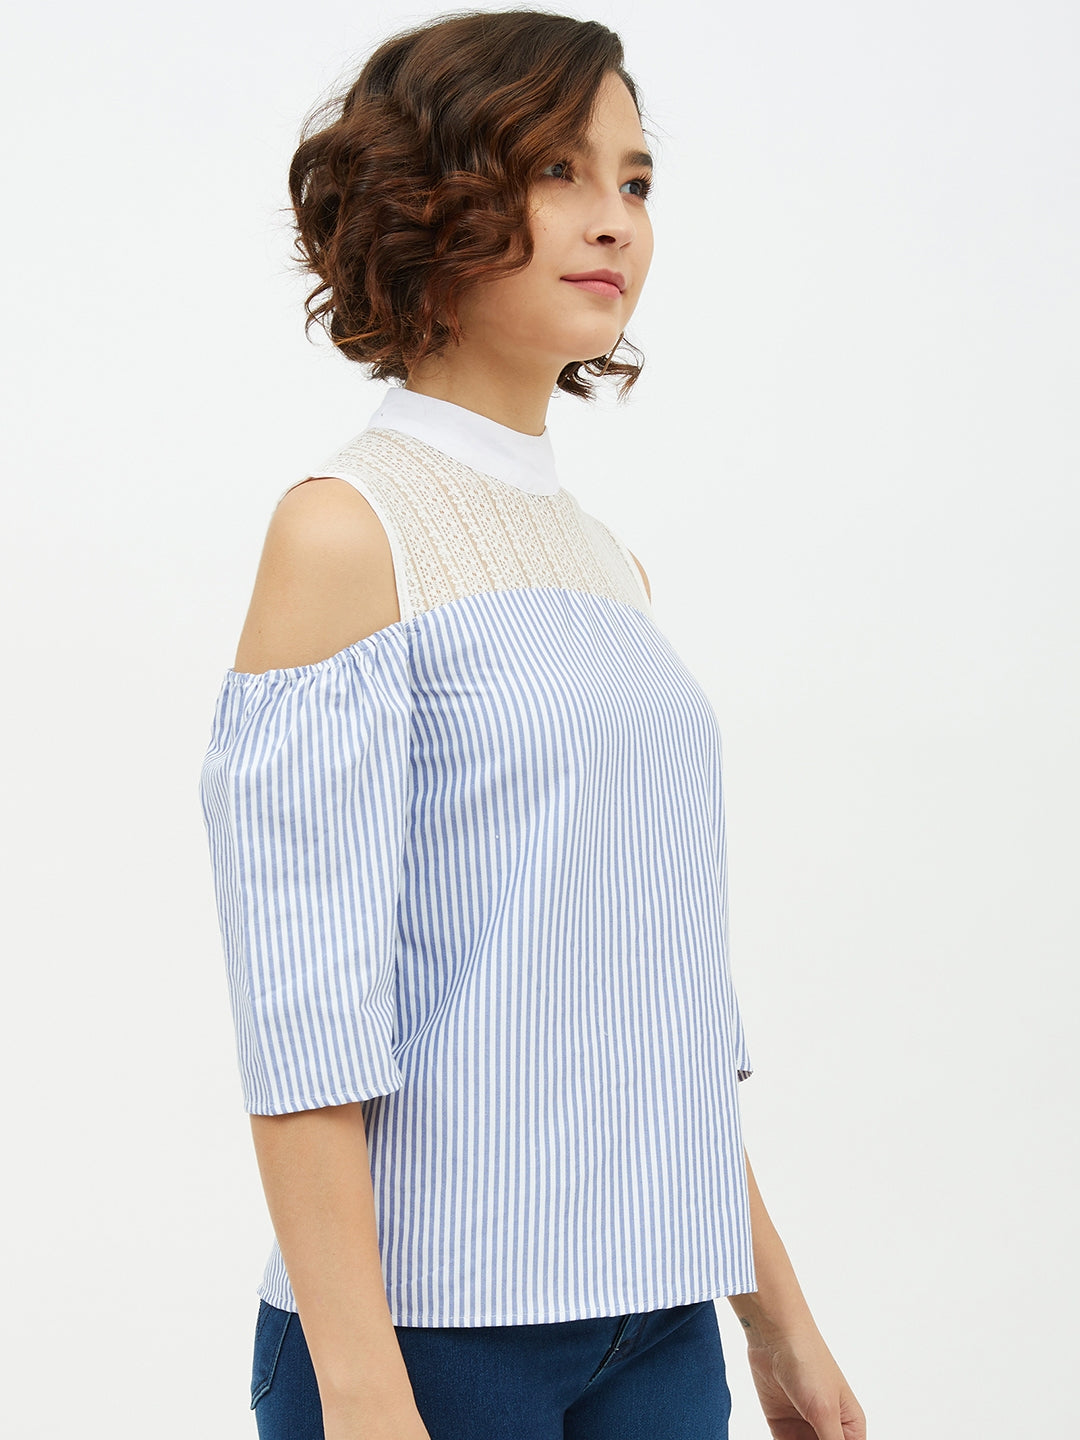 Women's Blue & White Cotton Stripe with Lace detail top